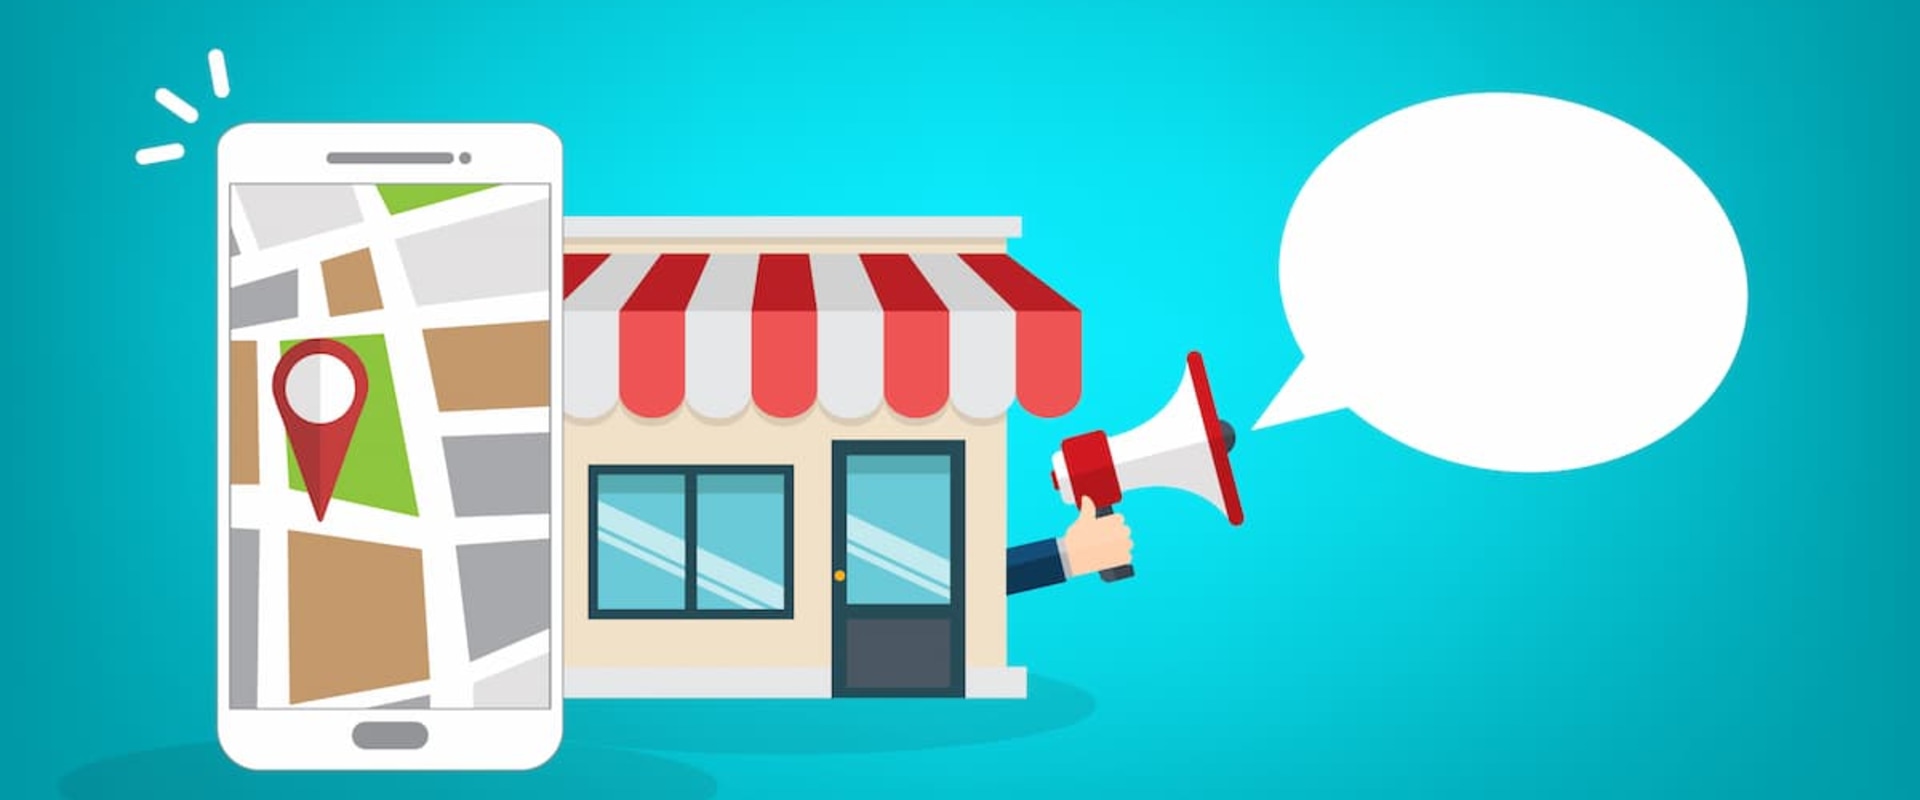 What is the importance of local seo in digital marketing?